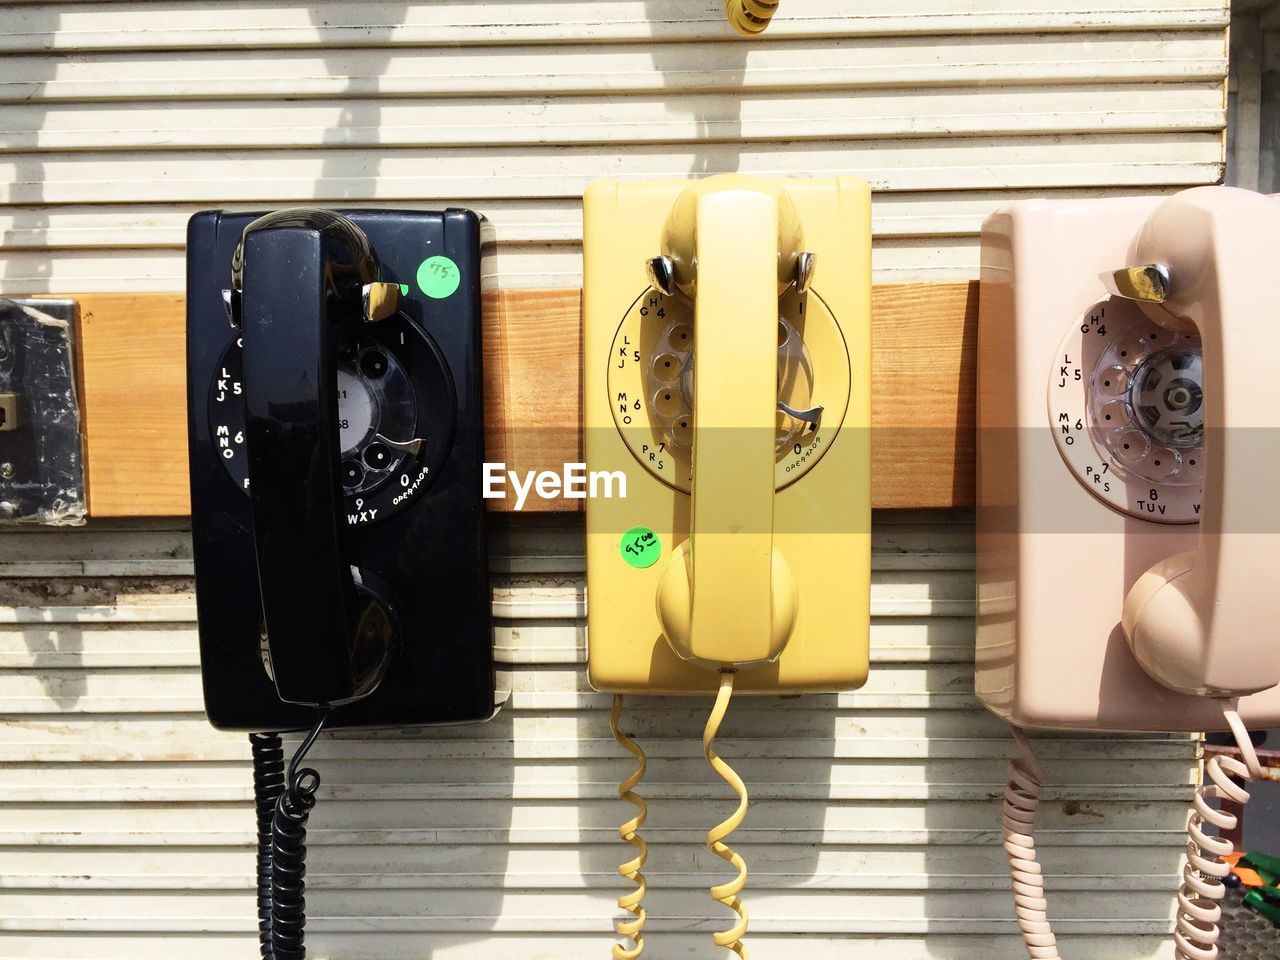 Old-fashioned telephones mounted on wall